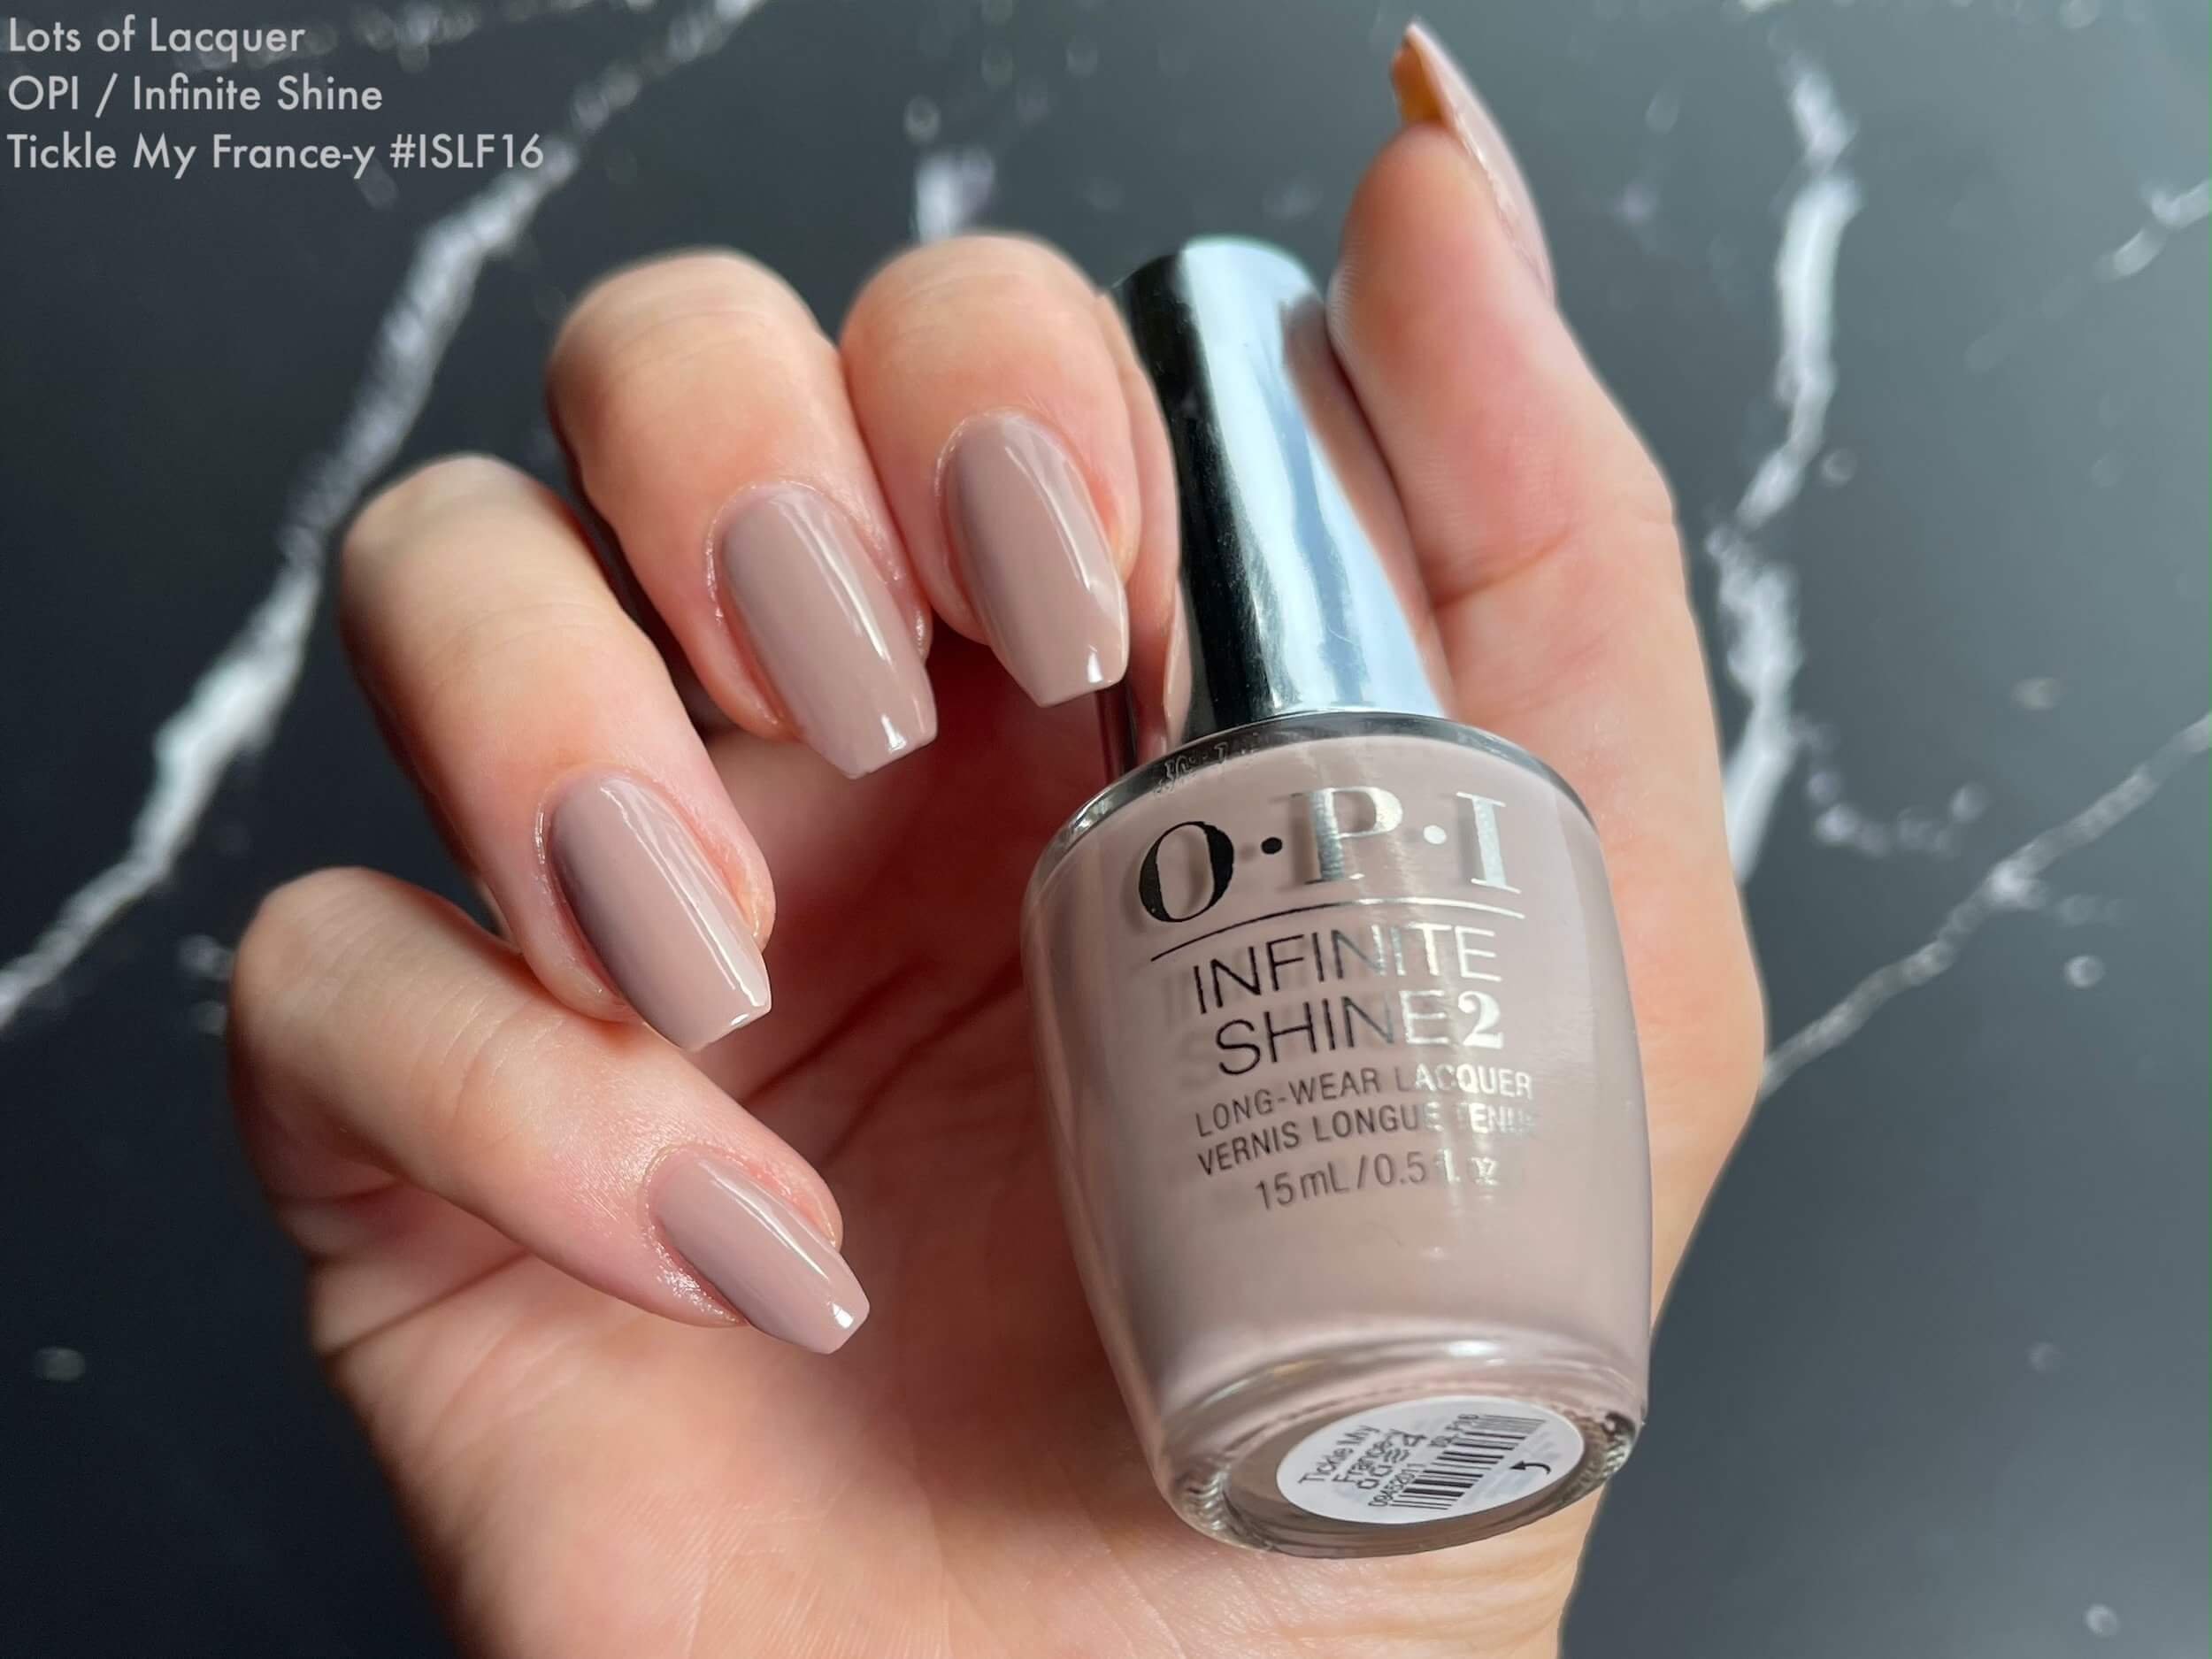 8. OPI "Tickle My France-y" - wide 5